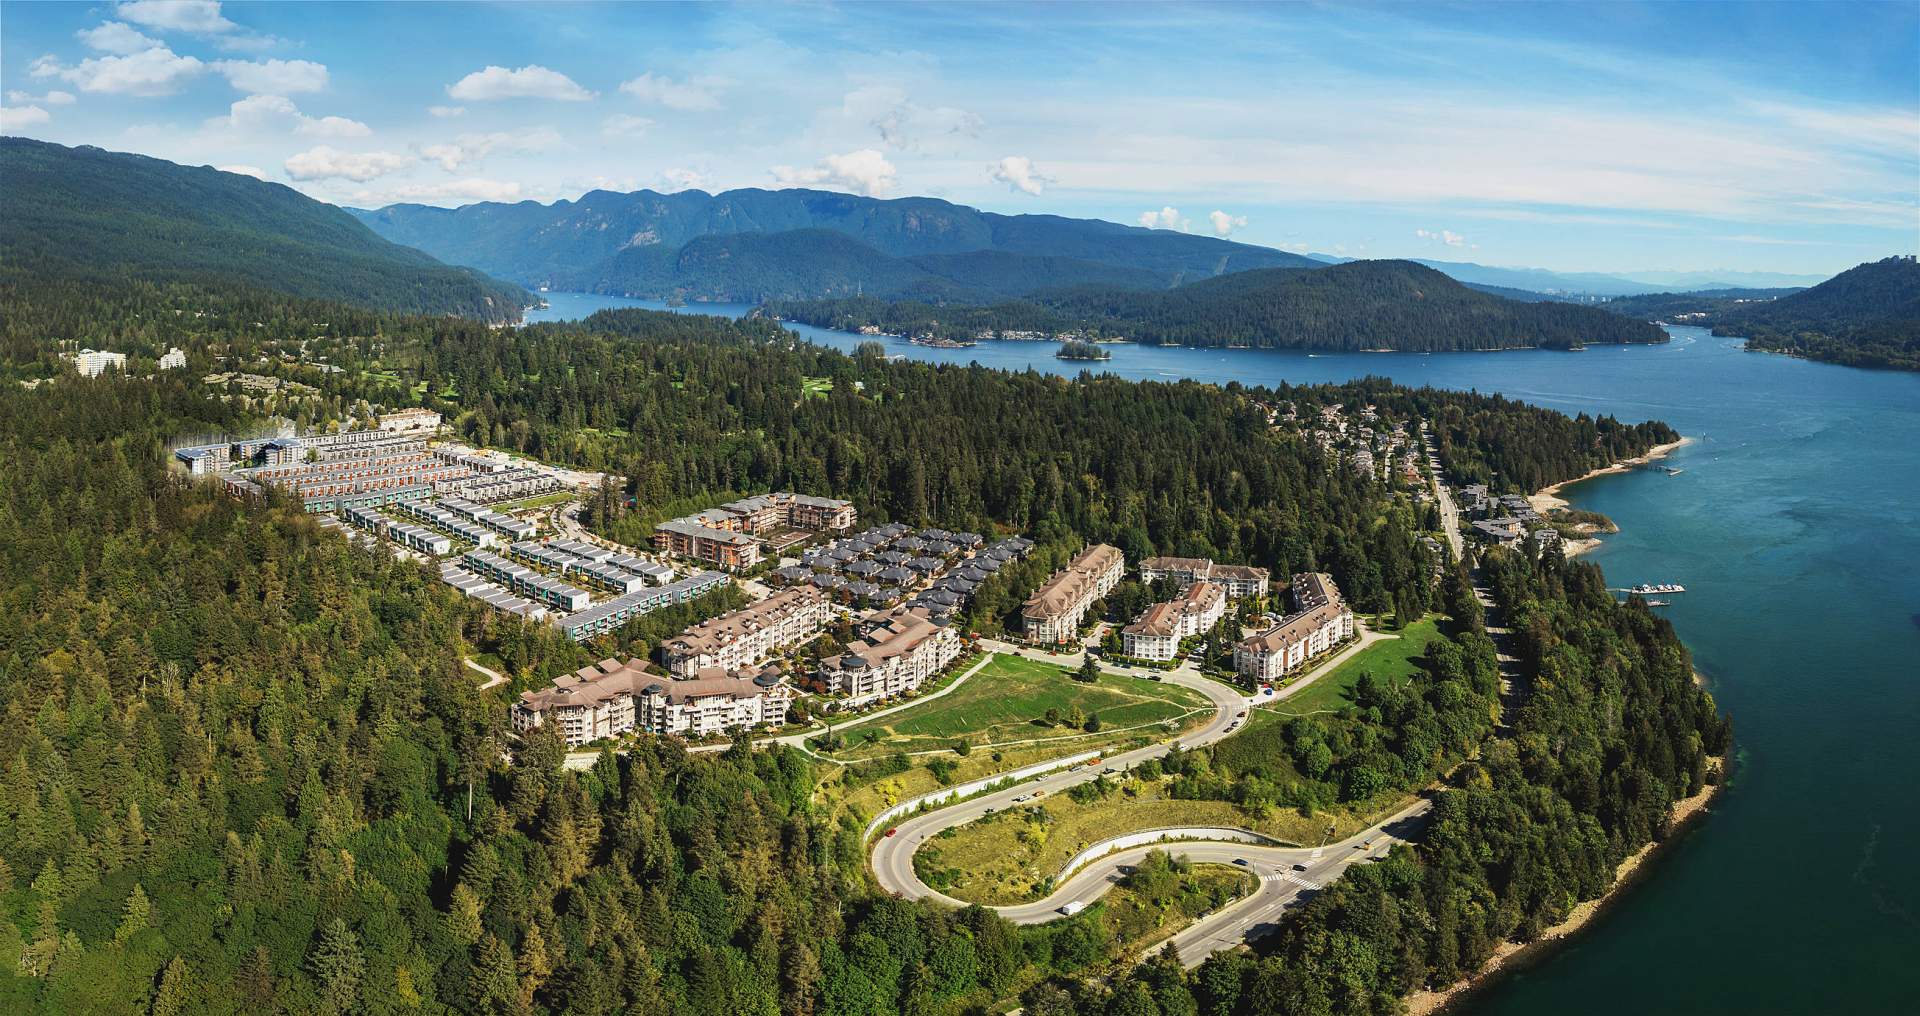 The first condominium offering in the North Shore's Seymour Village community.